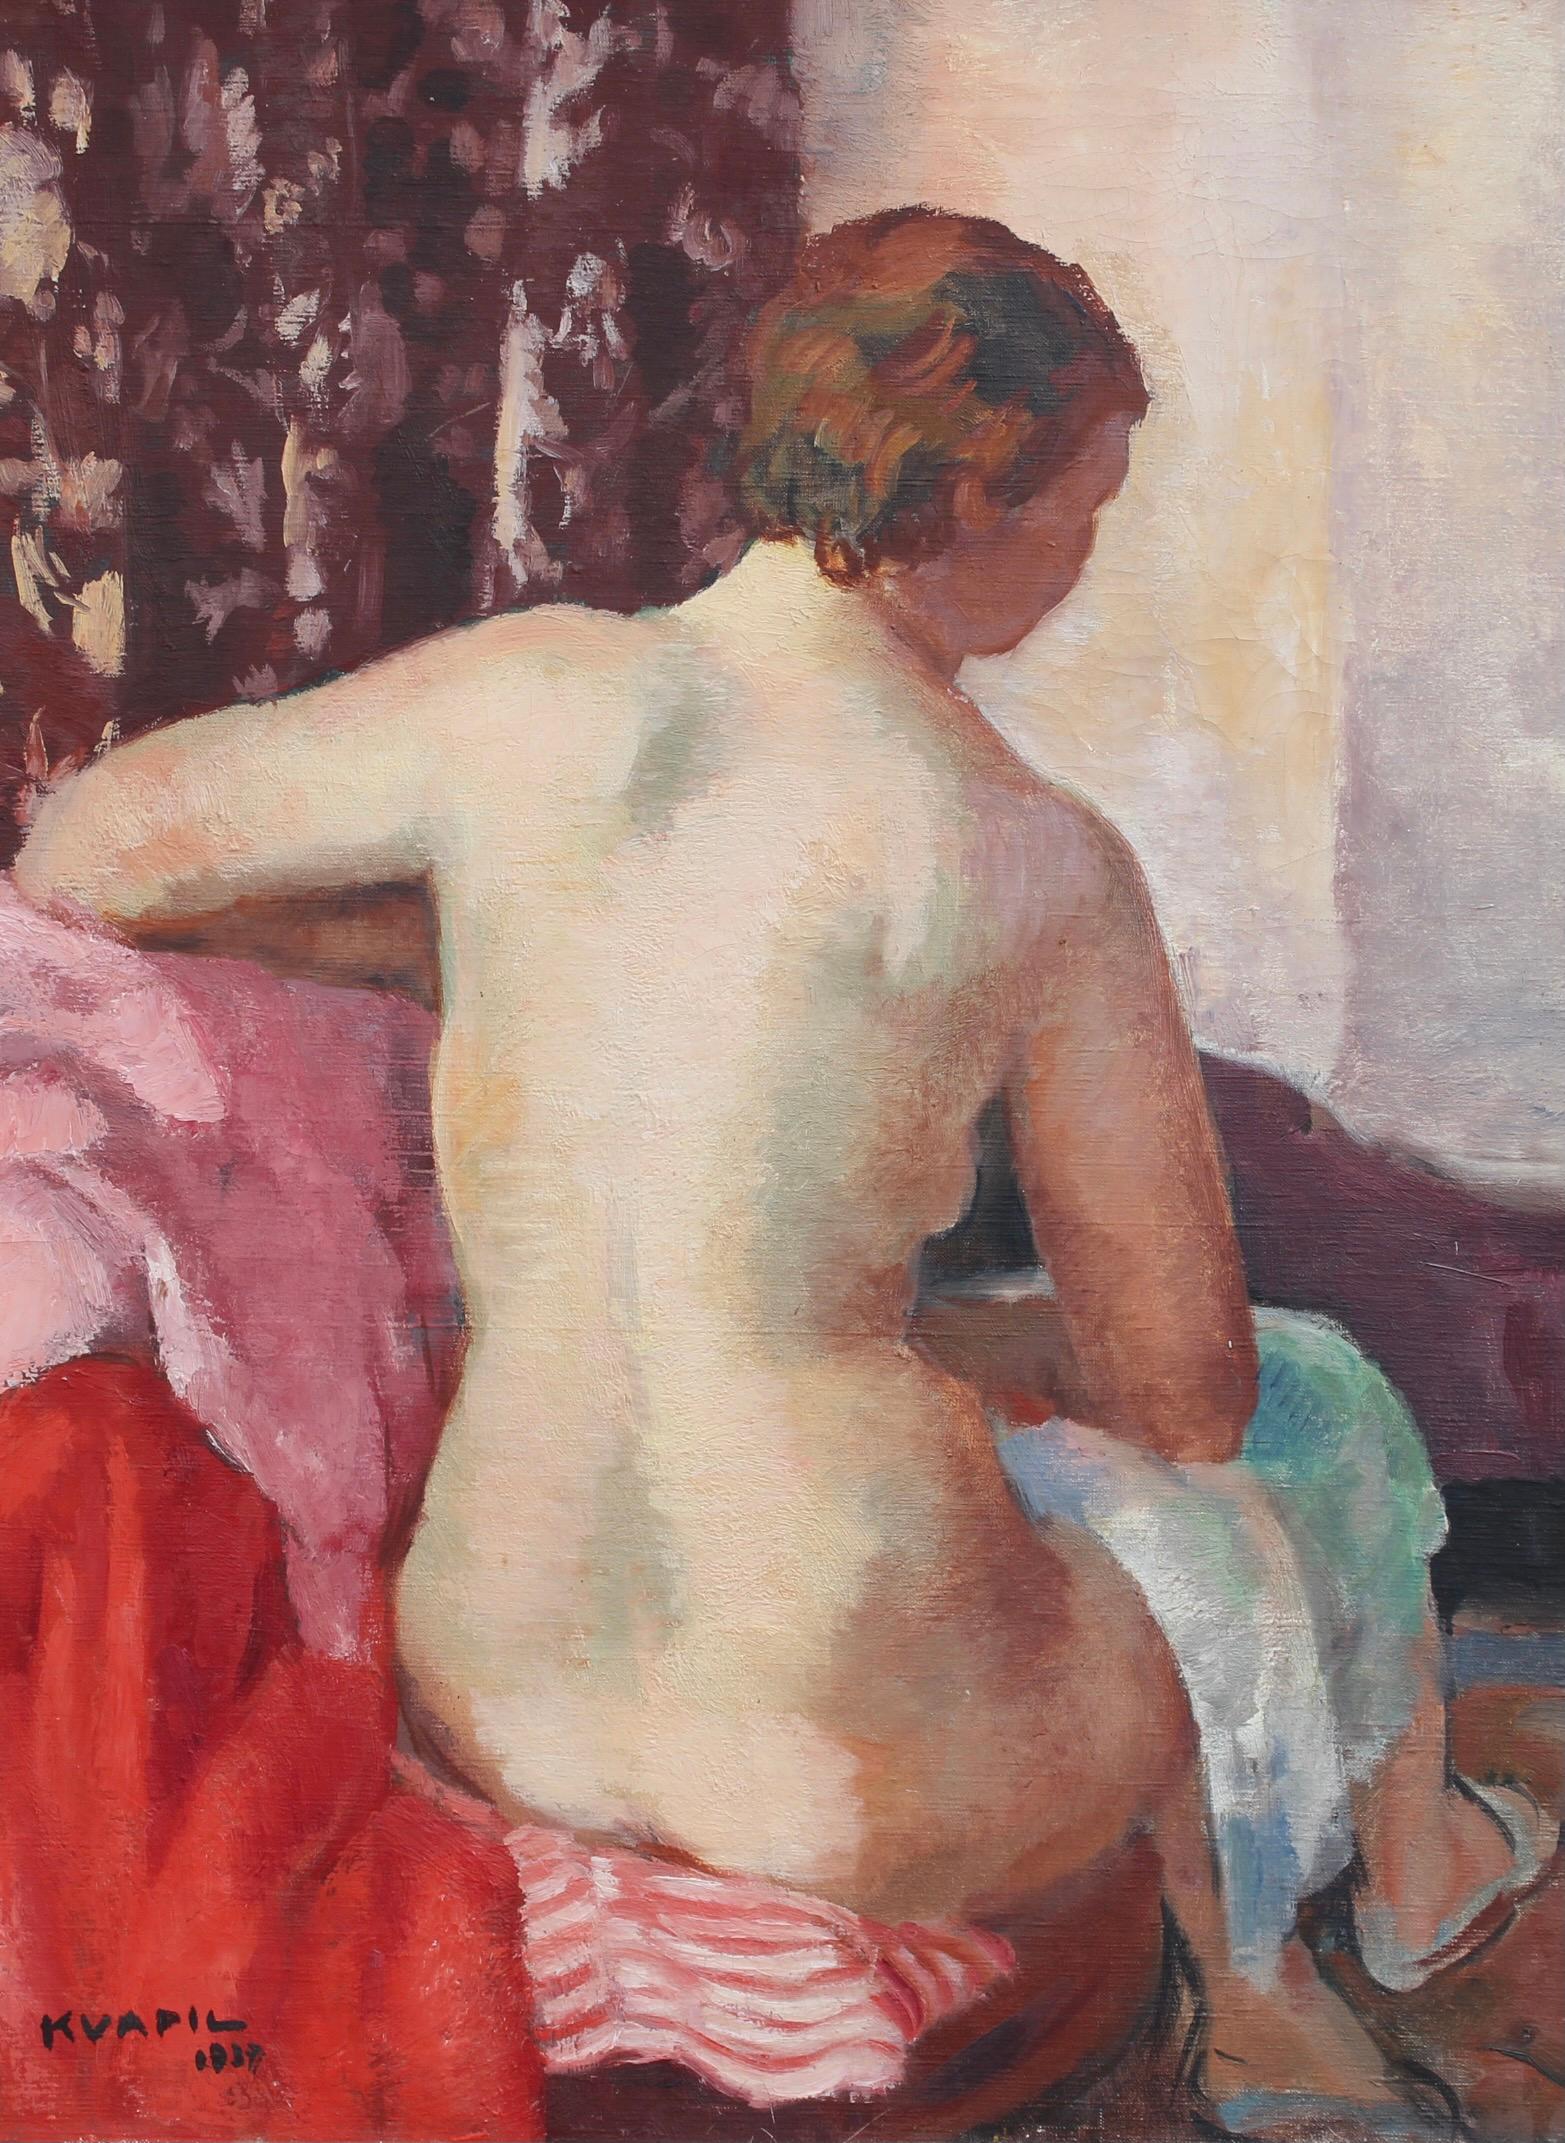 'Nude Viewed from the Back', oil on canvas, by Charles Kvapil (1937). The world of art has for centuries depicted nudes in one form or another. Kvapil's wonderfully alluring versions may likely be inspired by Courbet and Cézanne. This nude appears